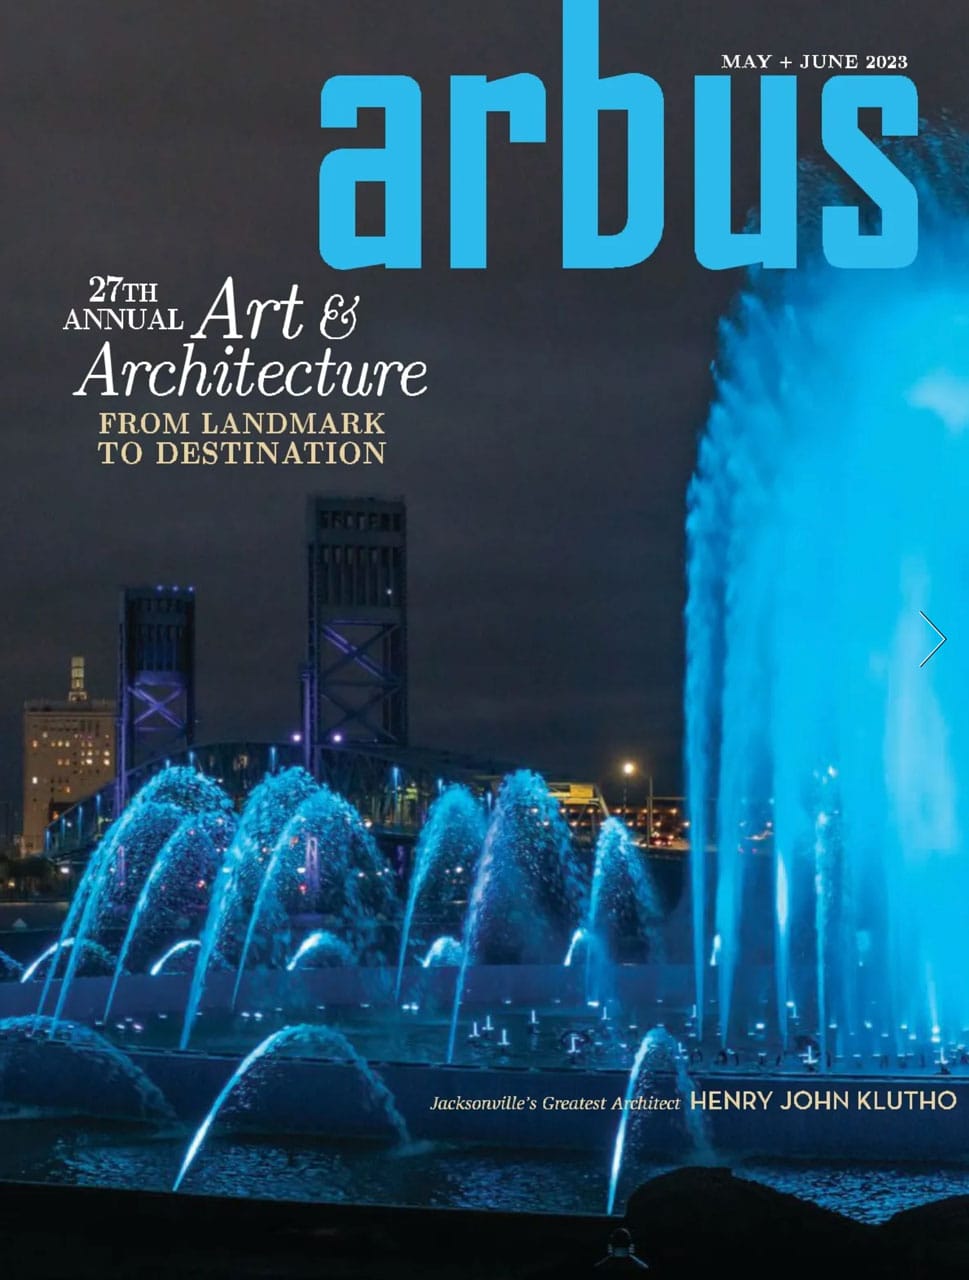 Arbus Magazine Cover featuring Art and Architecture May 2023 with an article by Marsha Faulkner on Interior Design trends